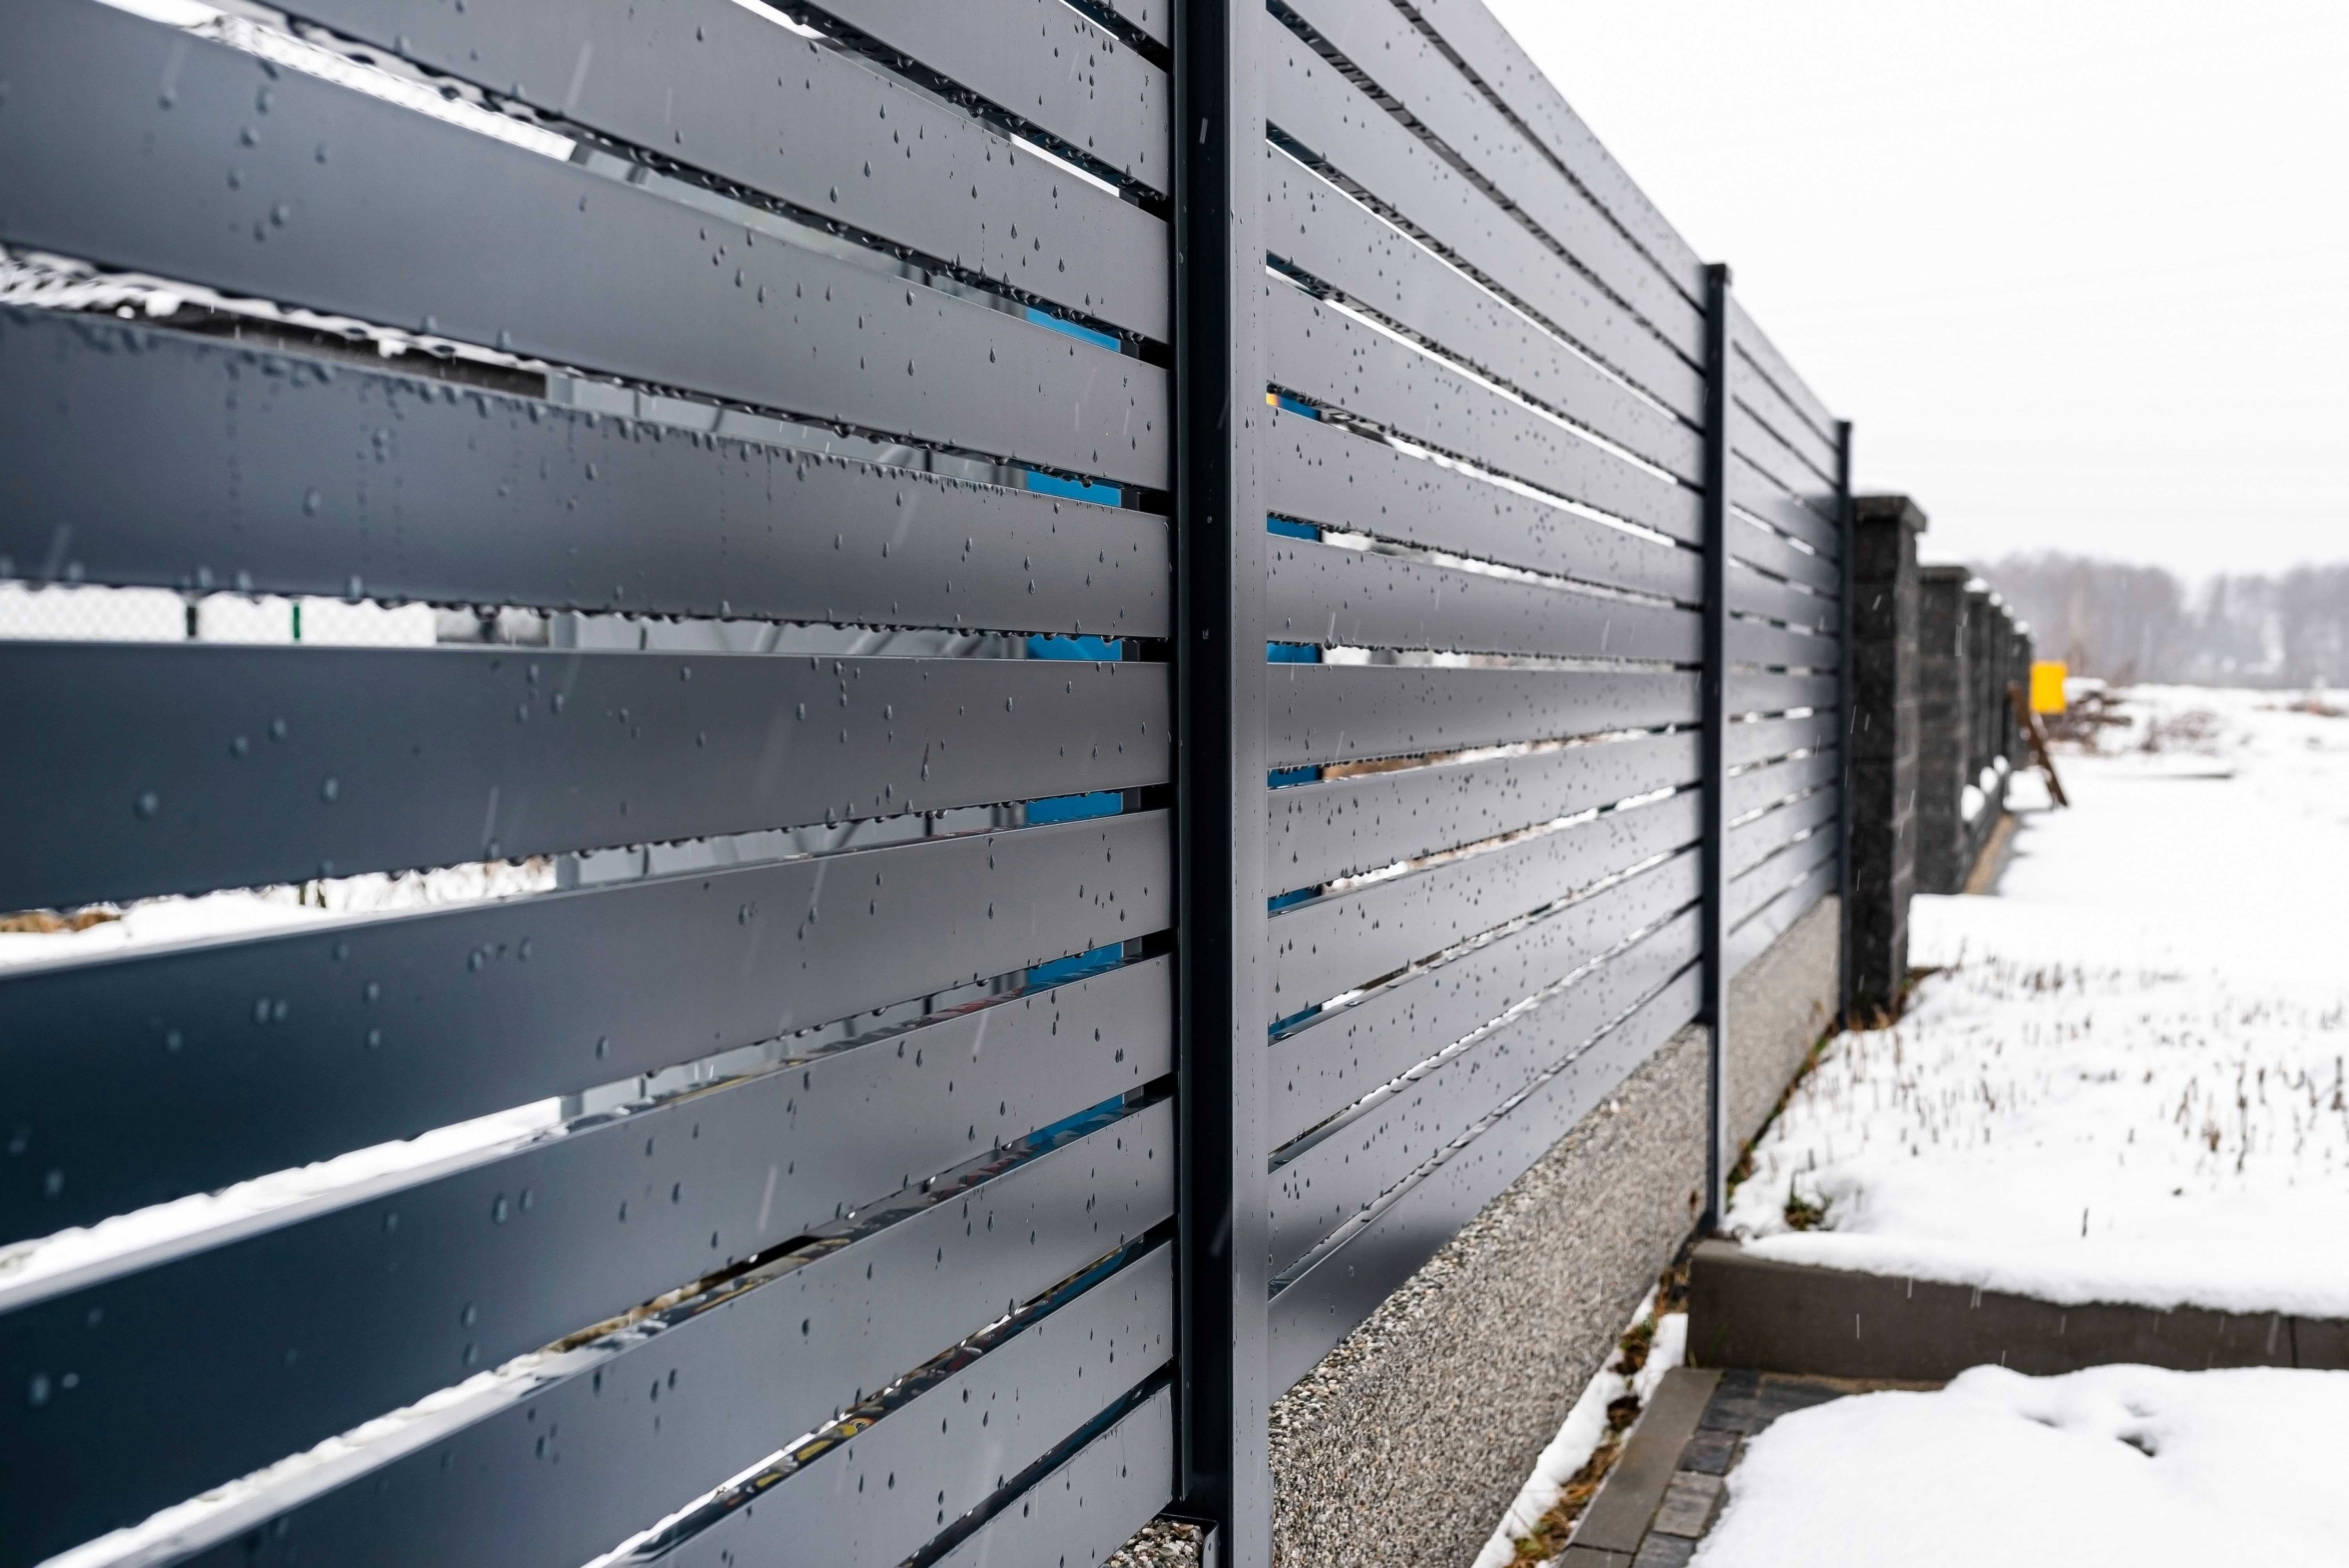 modern installed automatic gate in winter